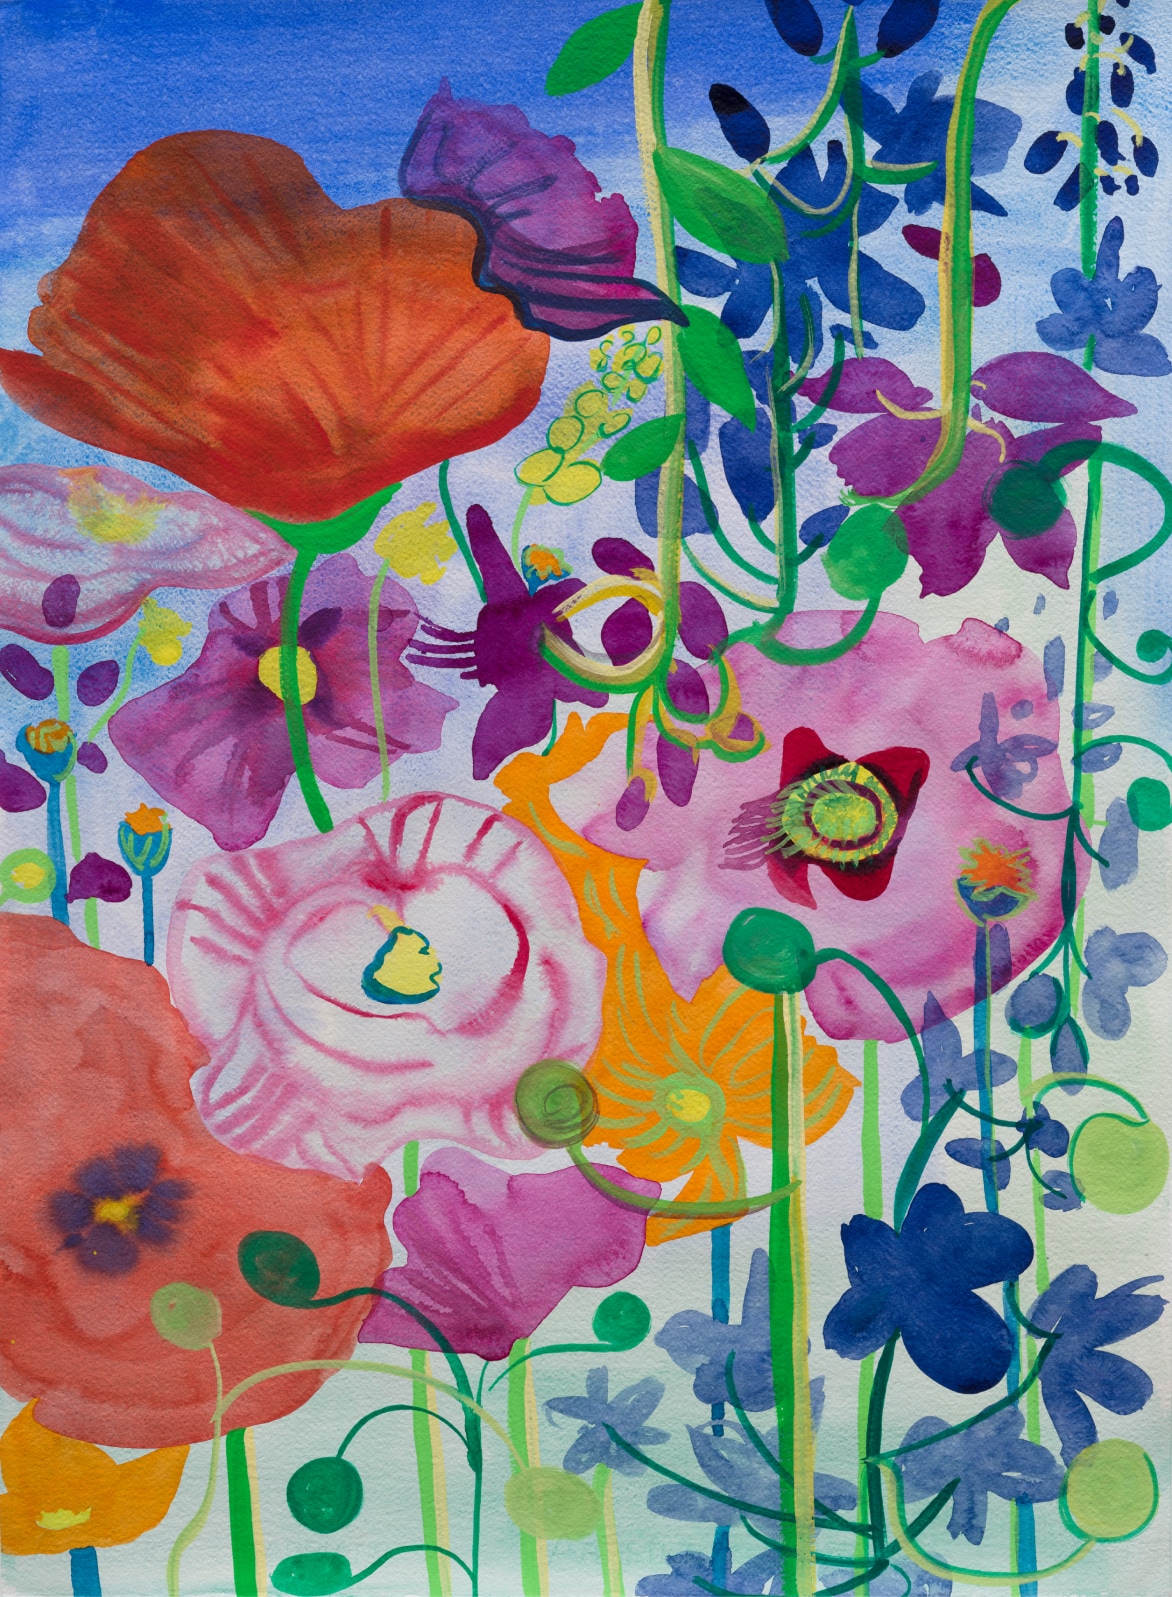 Nisenbaum’s “Poppy Blooms” featuring red, pink, and puple poppy flowers with abstract blooms in the background